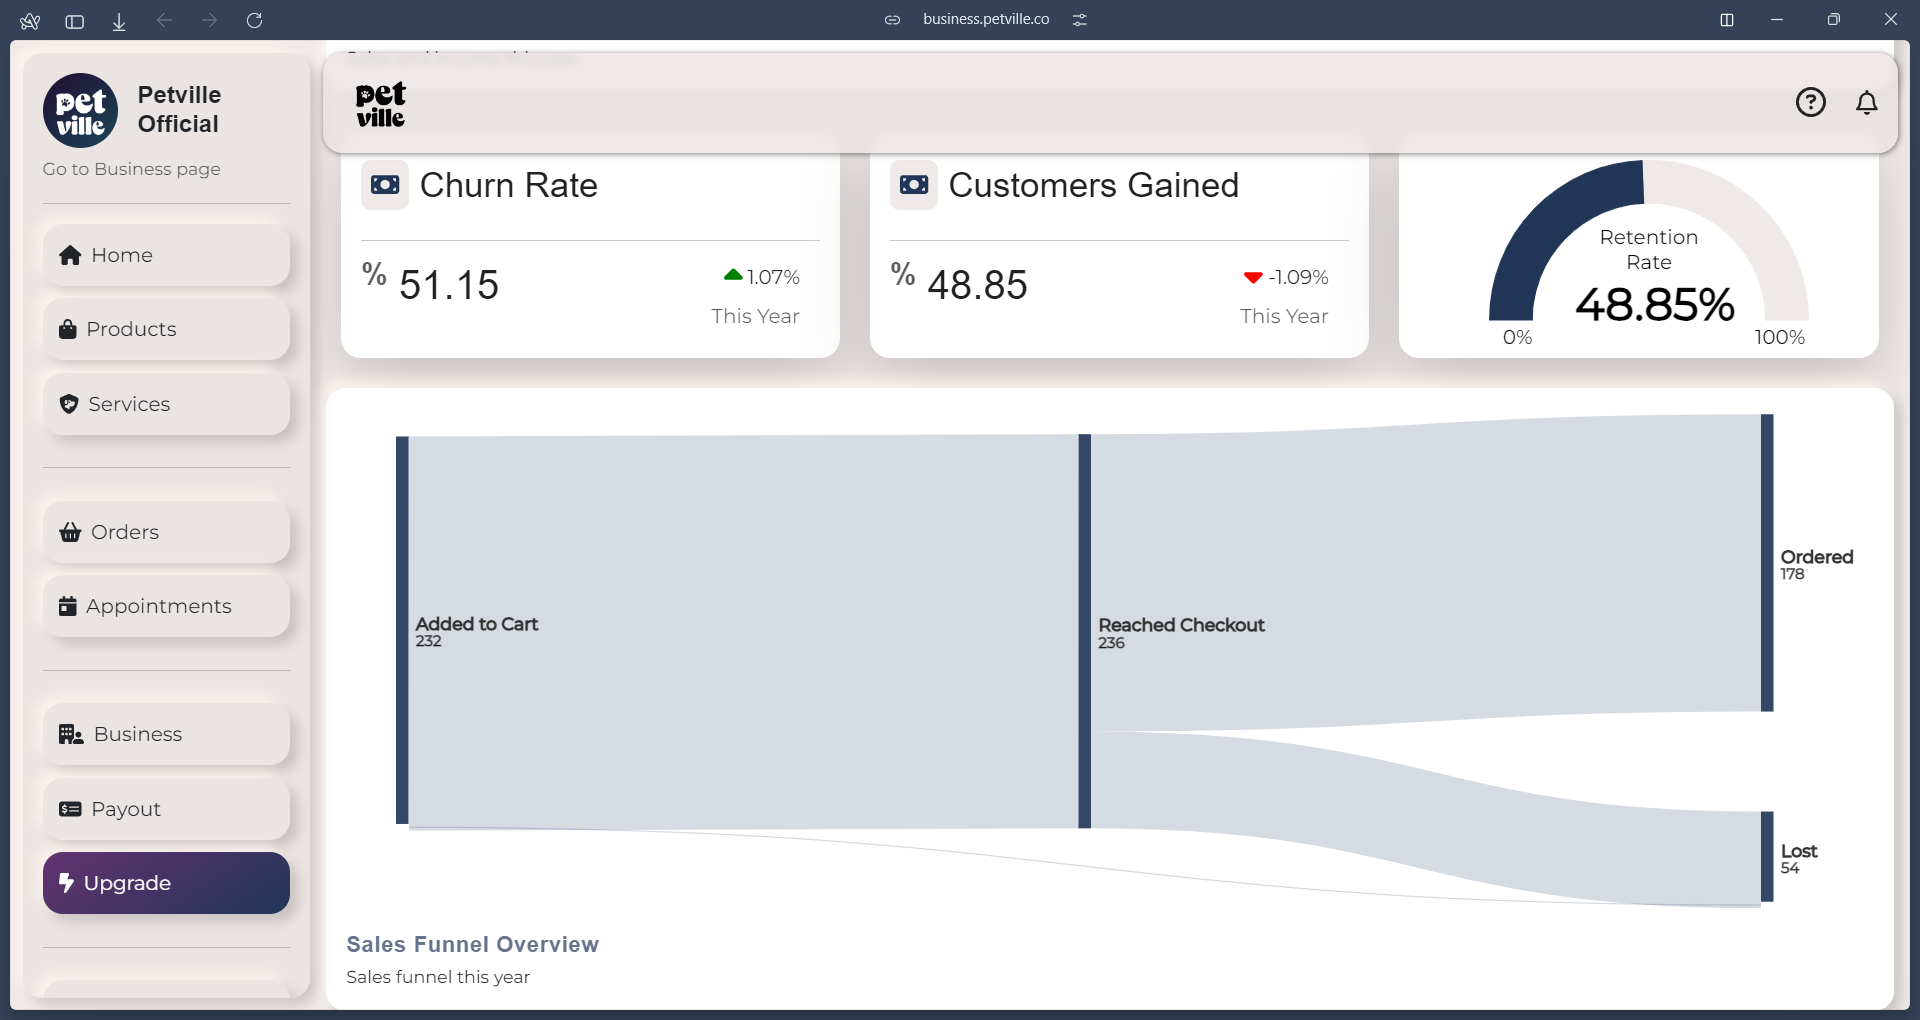 Homepage demo of Petville Business dashboard